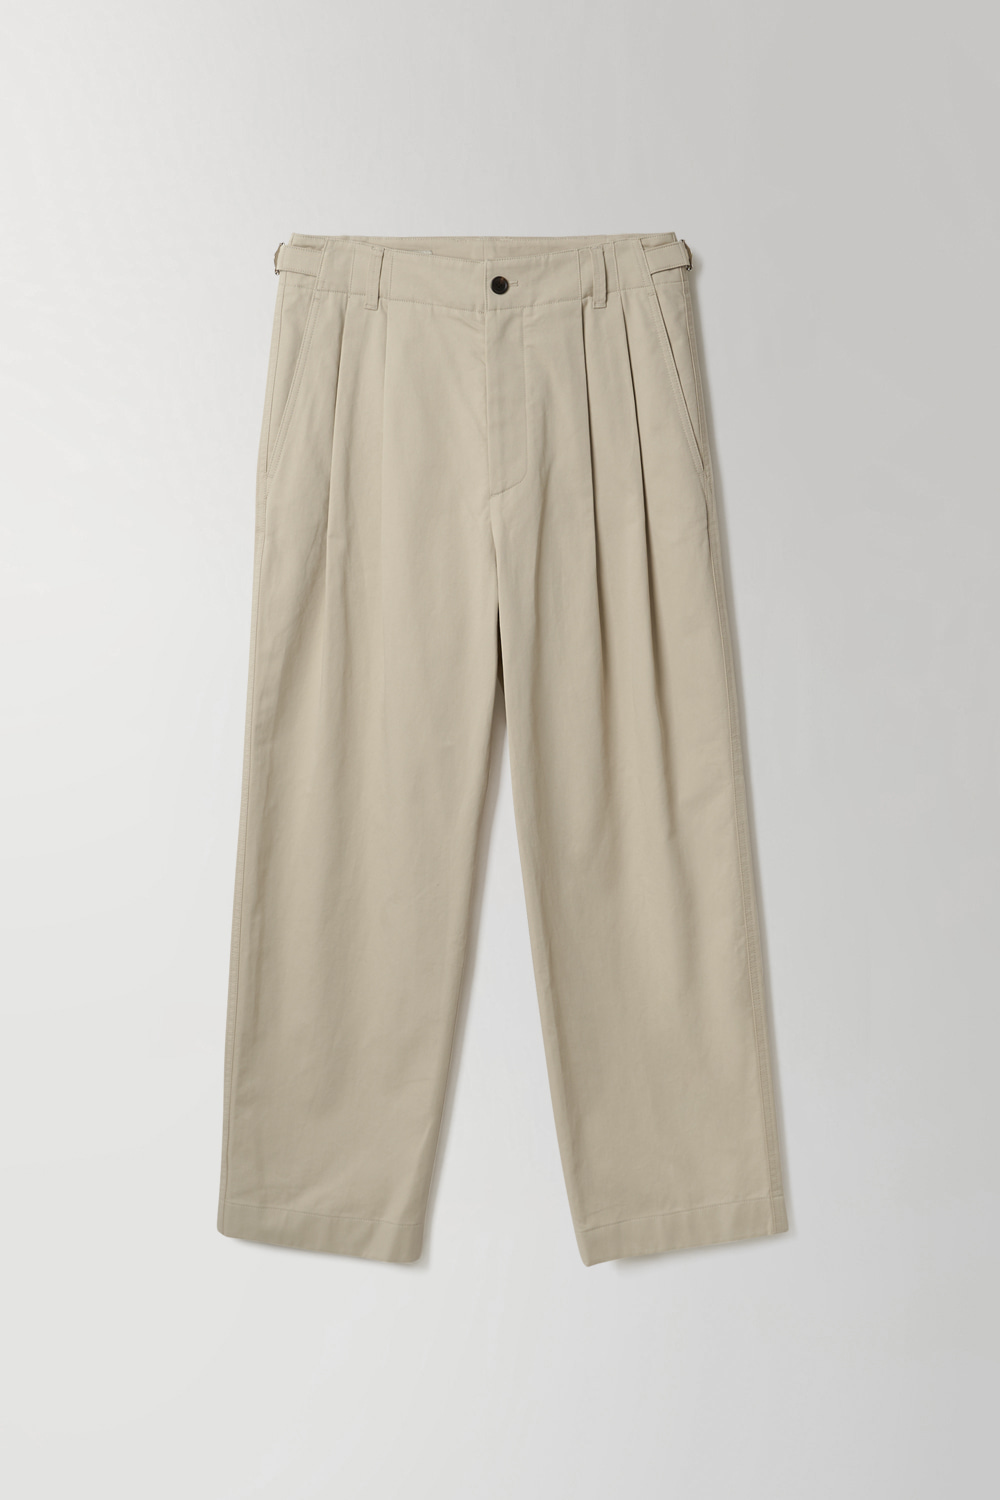 22AW TRAVELLER CHINO PANTS - SAND BEIGE